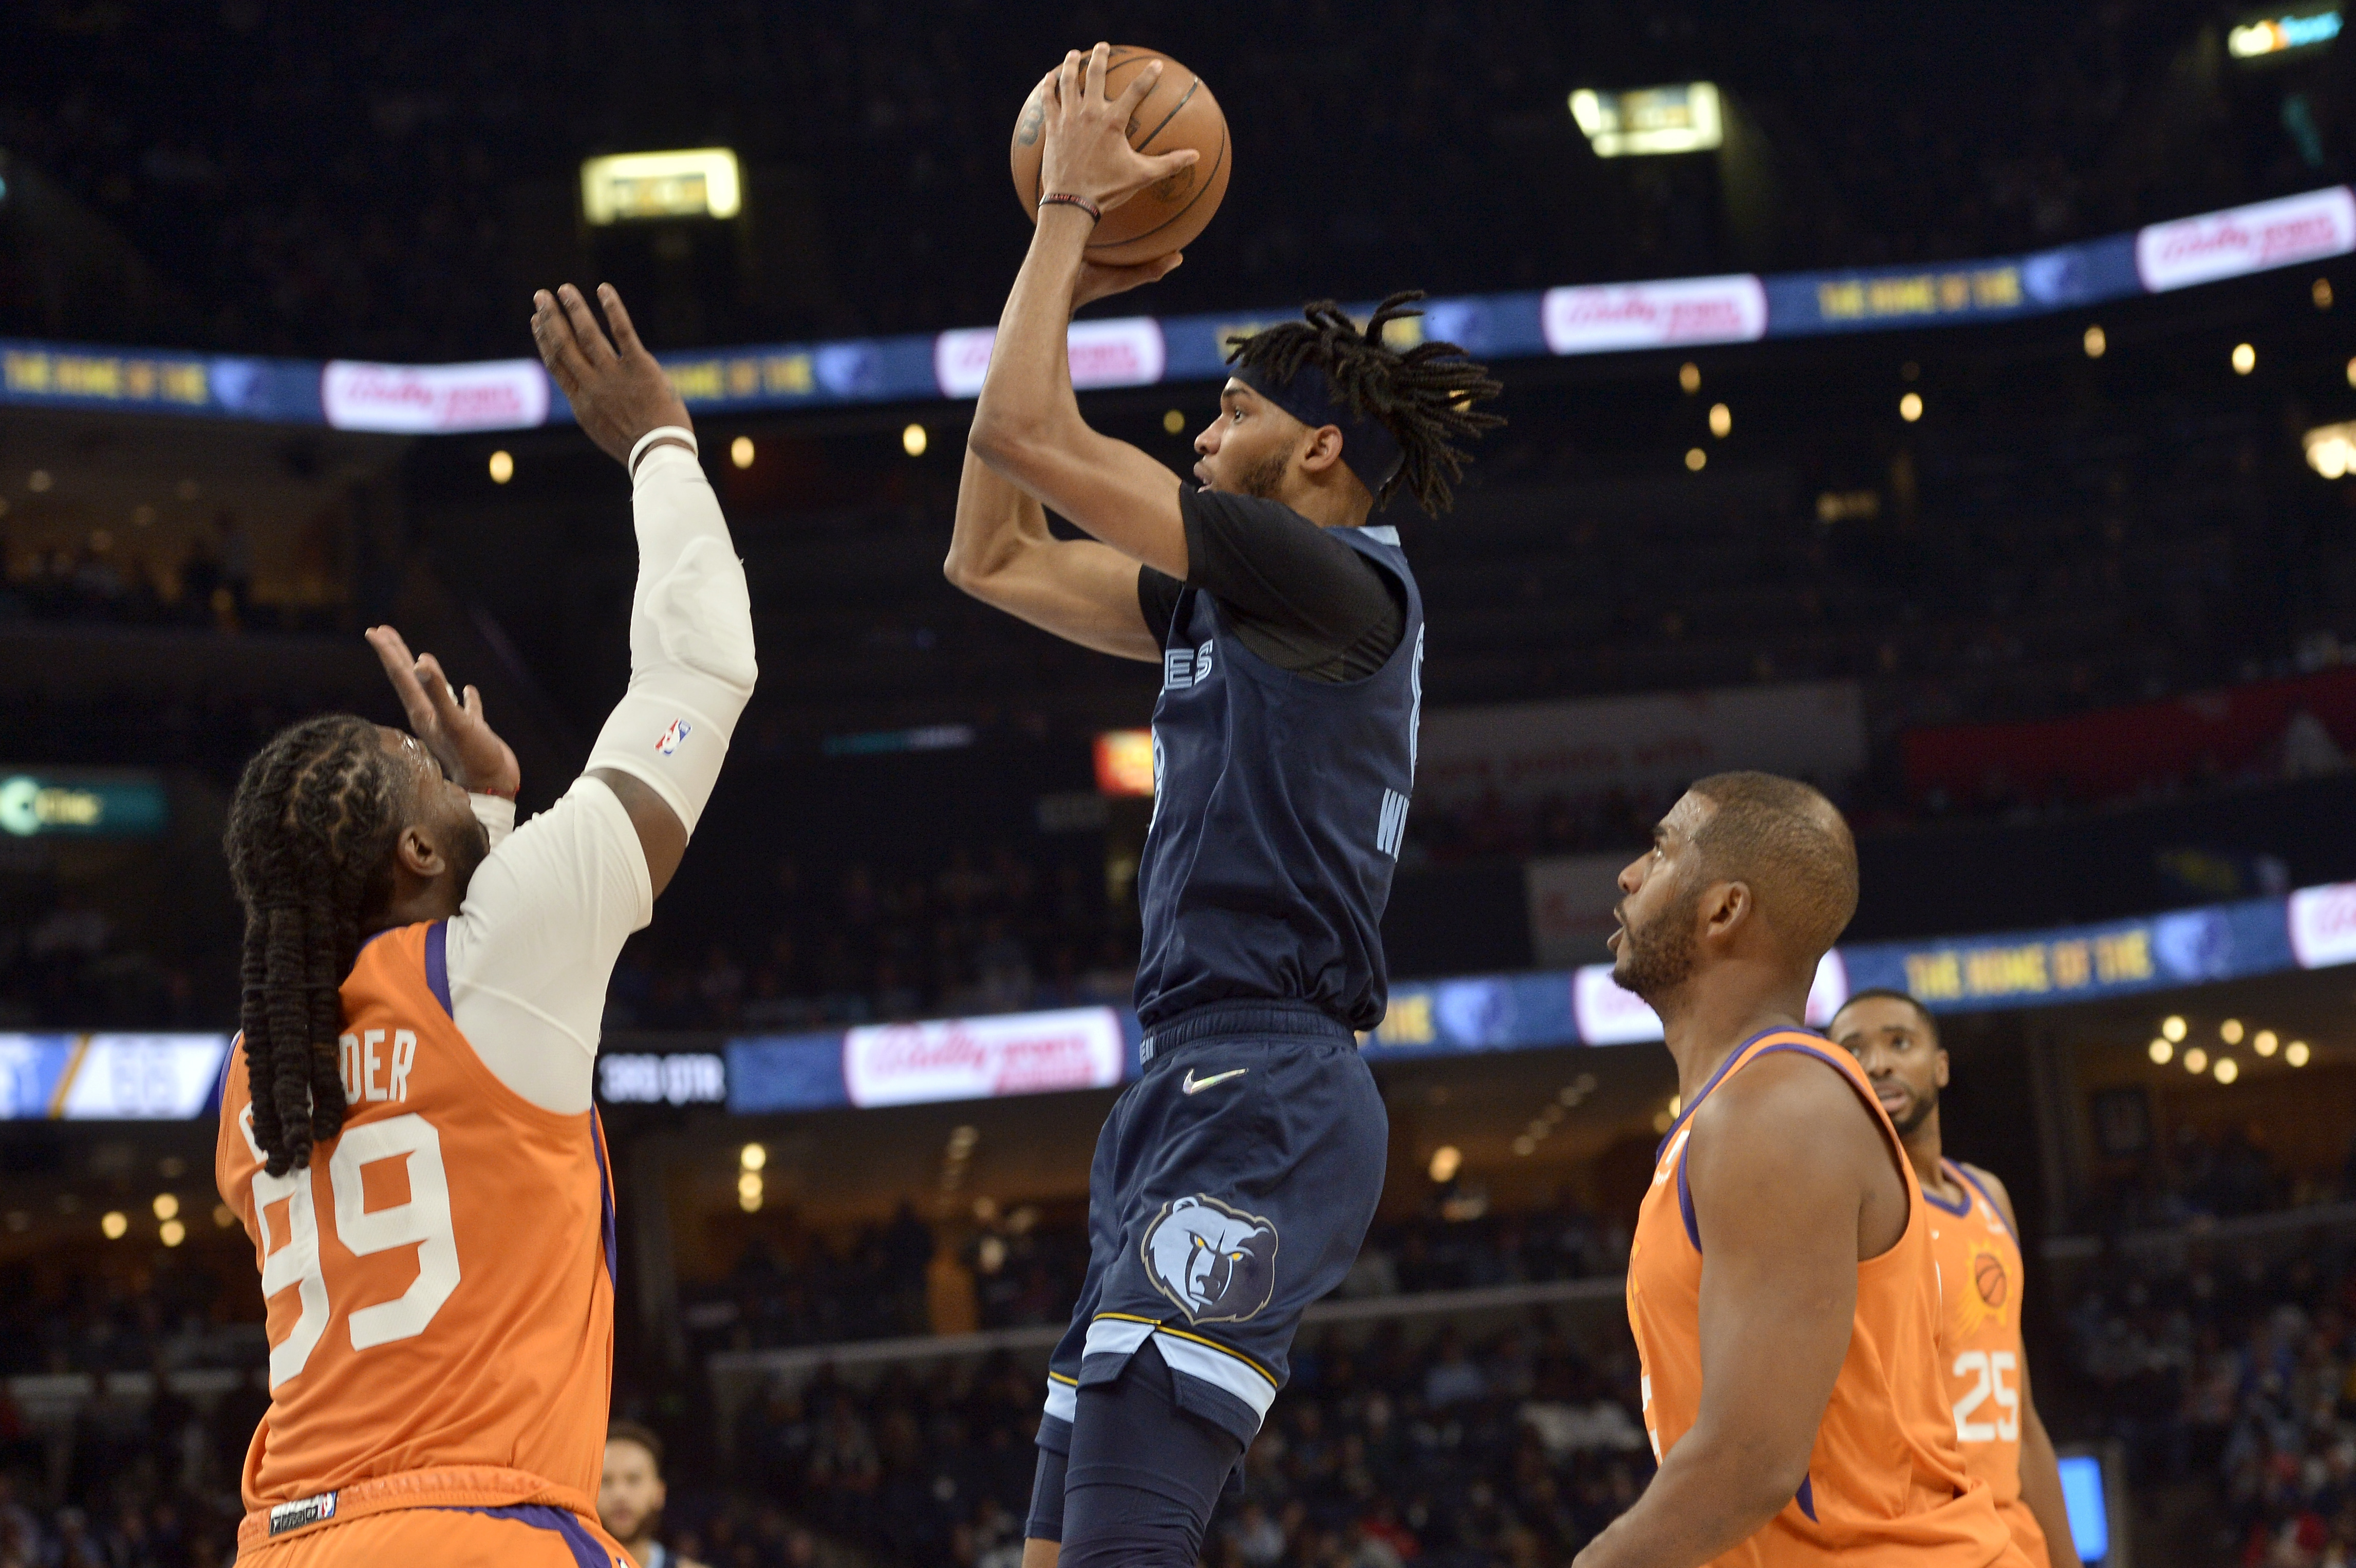 Spurs blow 29-point lead in losing in overtime to Grizzlies